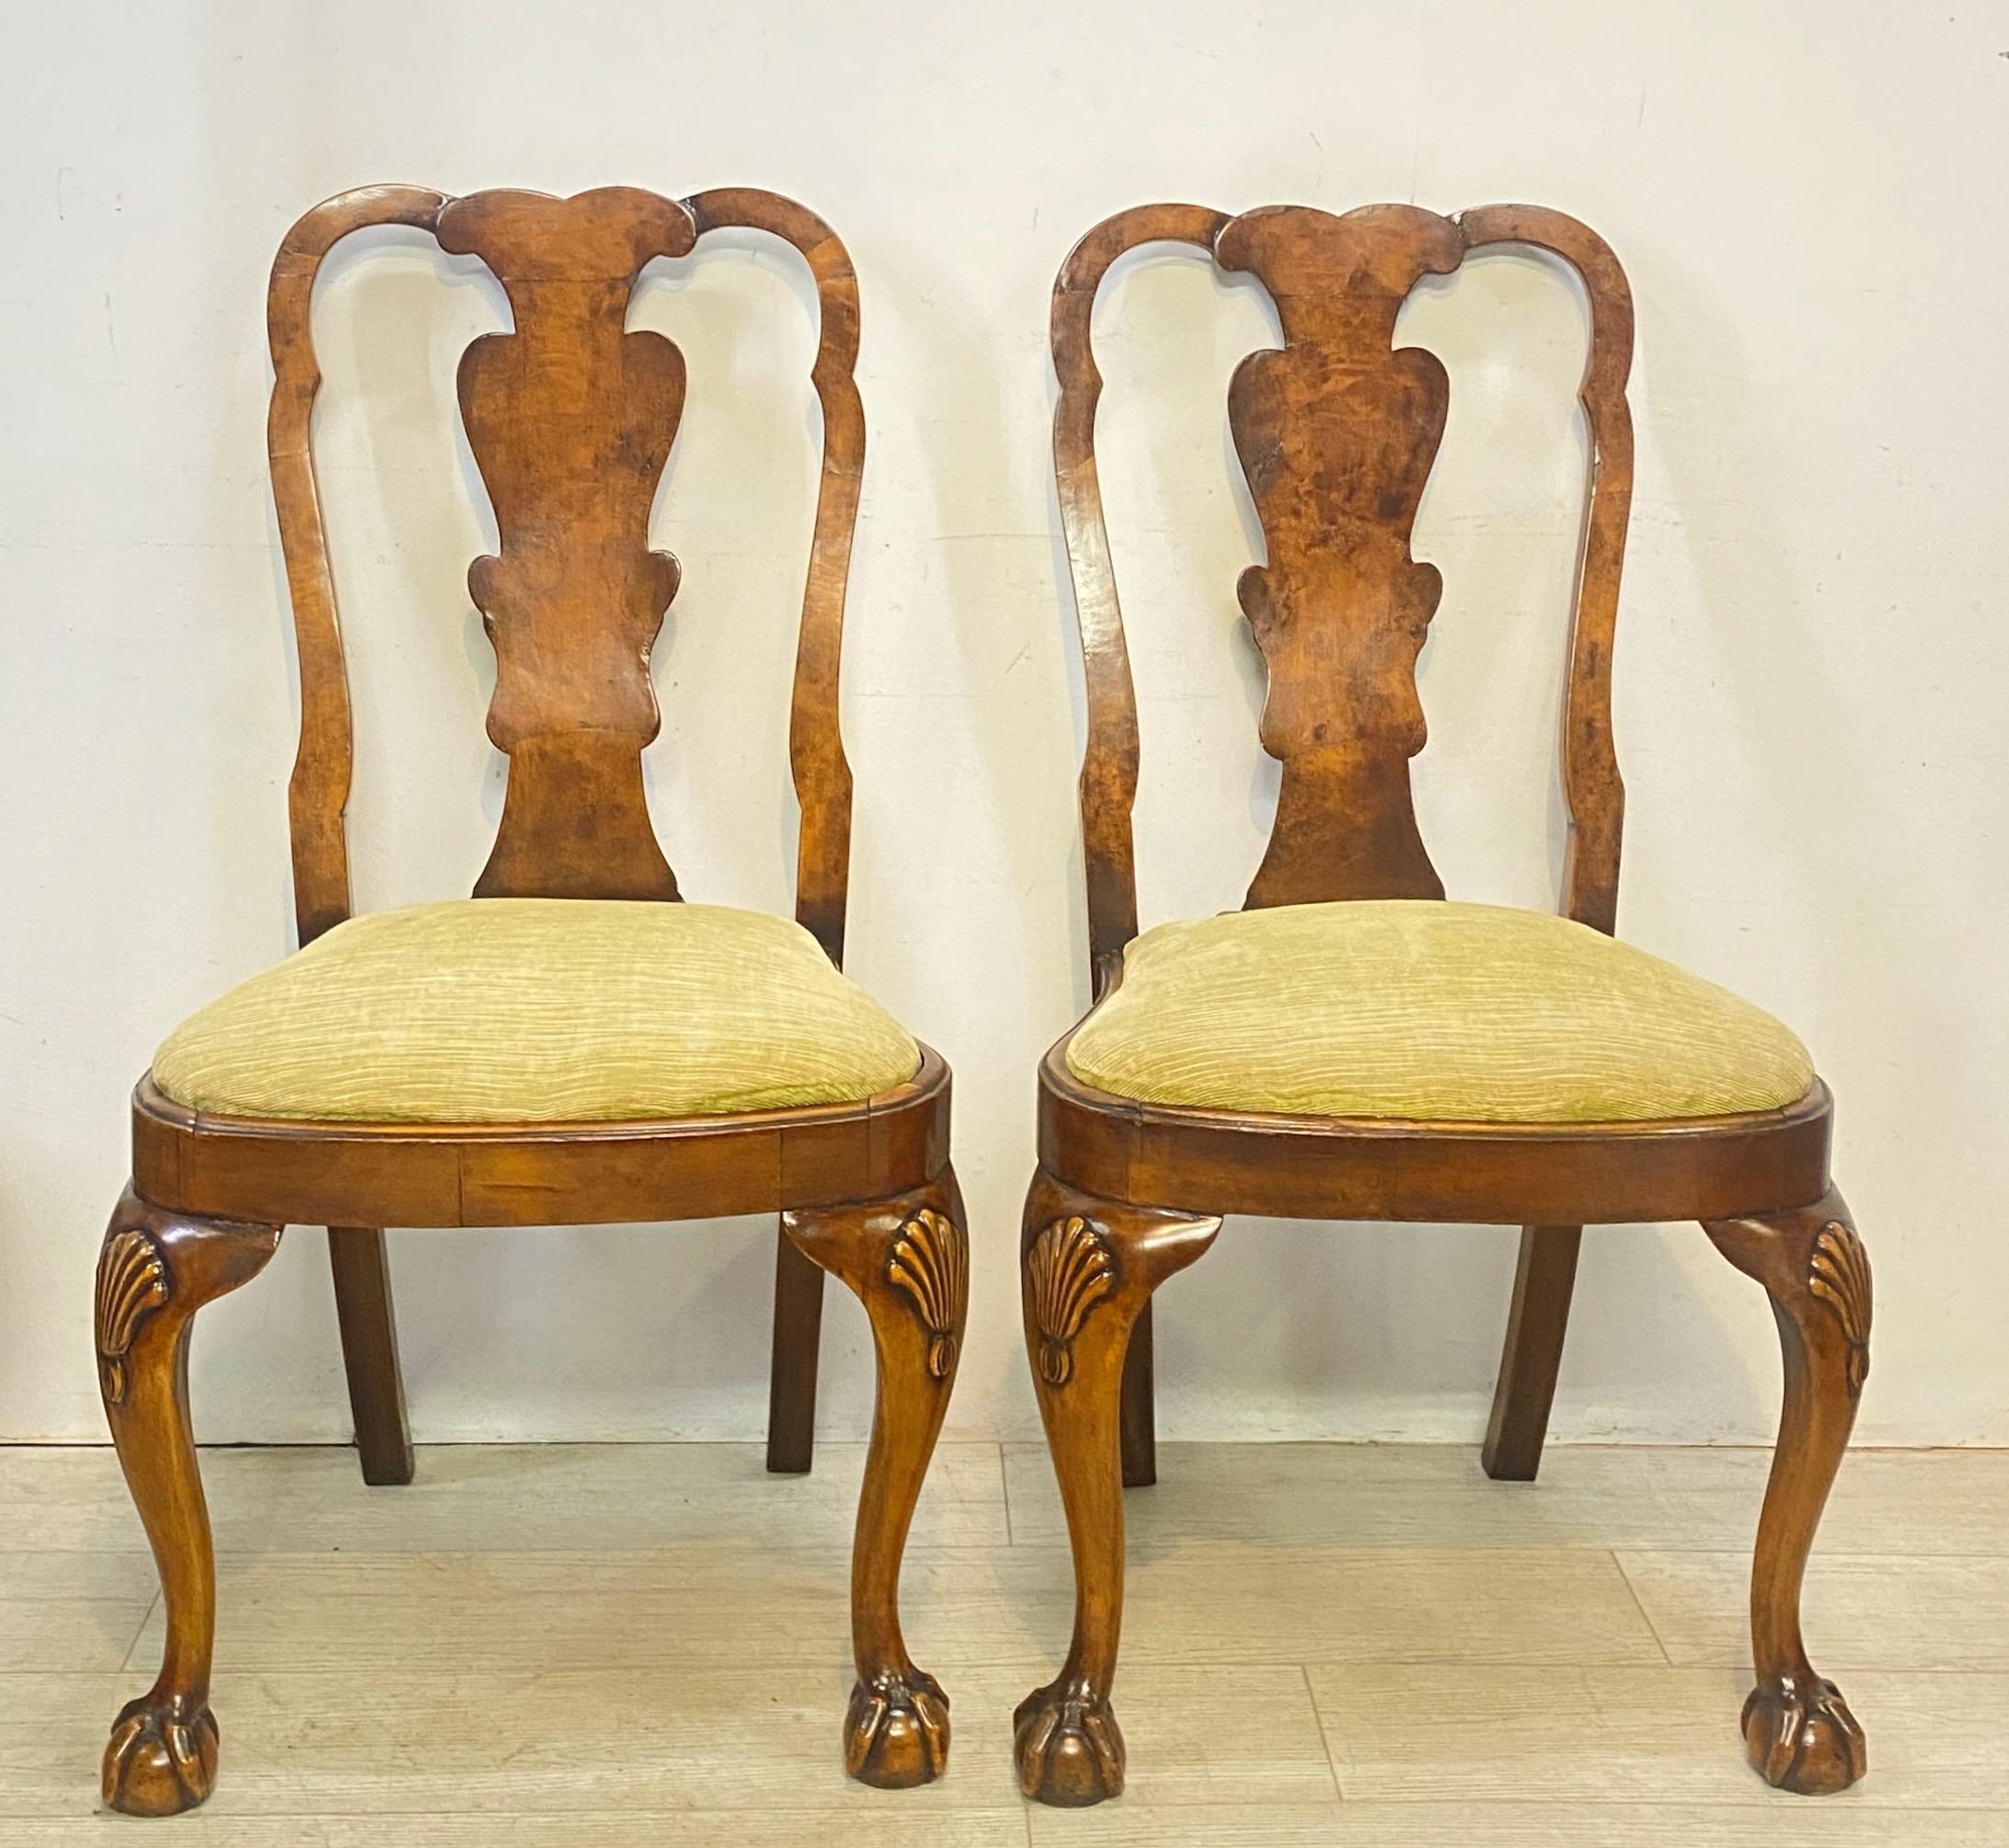 A pair of classic late 19th - early 20th century Chippendale style side dining chairs.
Burled walnut veneer over solid walnut, with upholstered seat.
Beautifully patinated old finish in good condition. Quality bench made chairs in the late 19th or